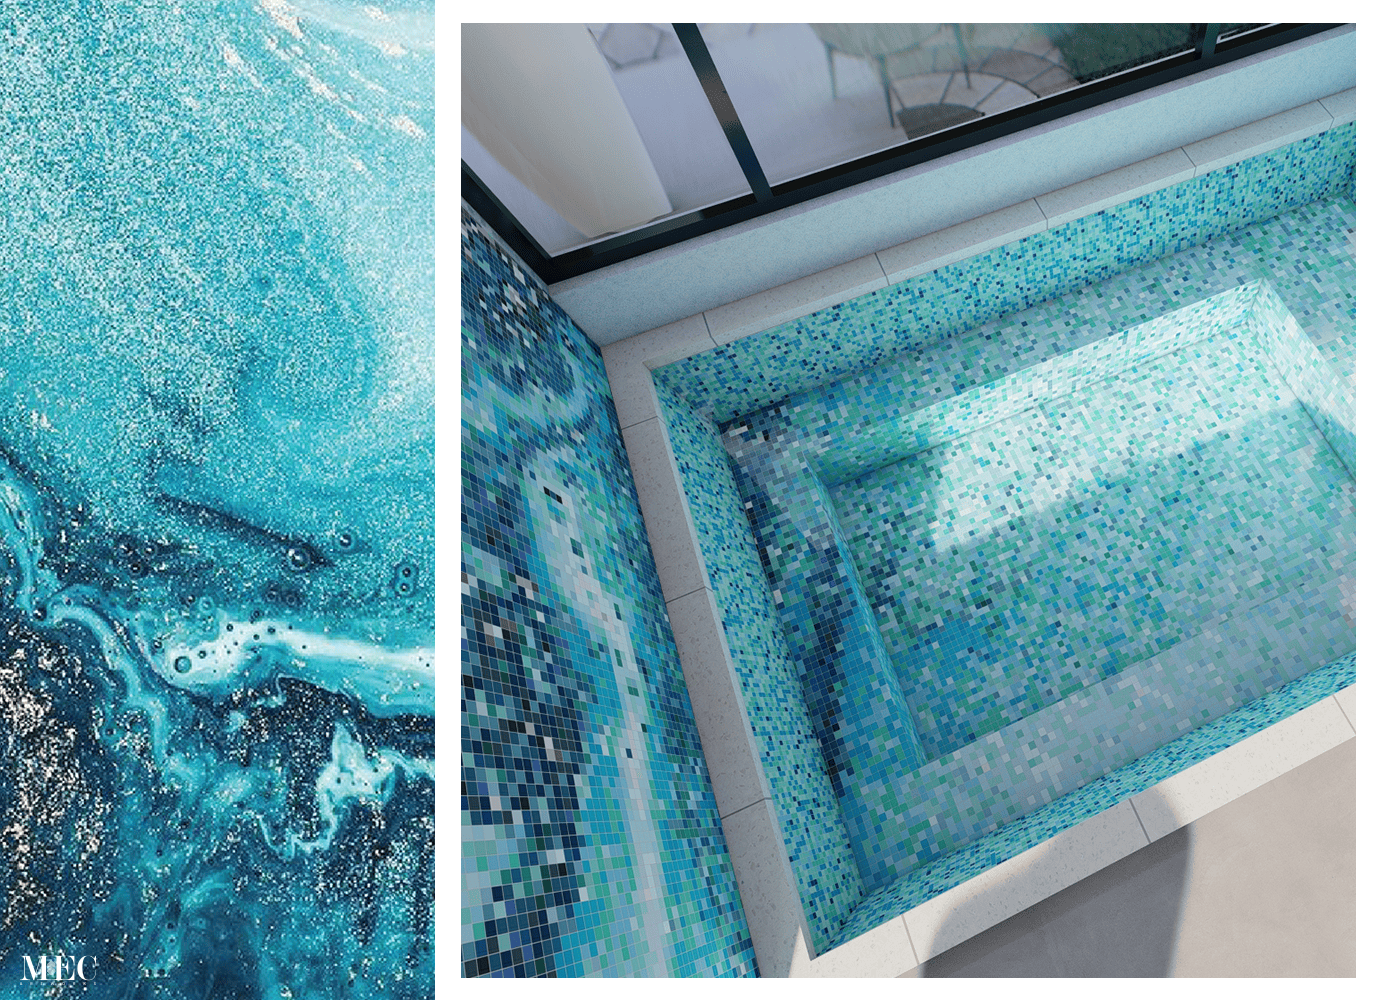 A custom mosaics for compact pools with a blue and white mosaic design, filled with clear water, reflecting natural light.